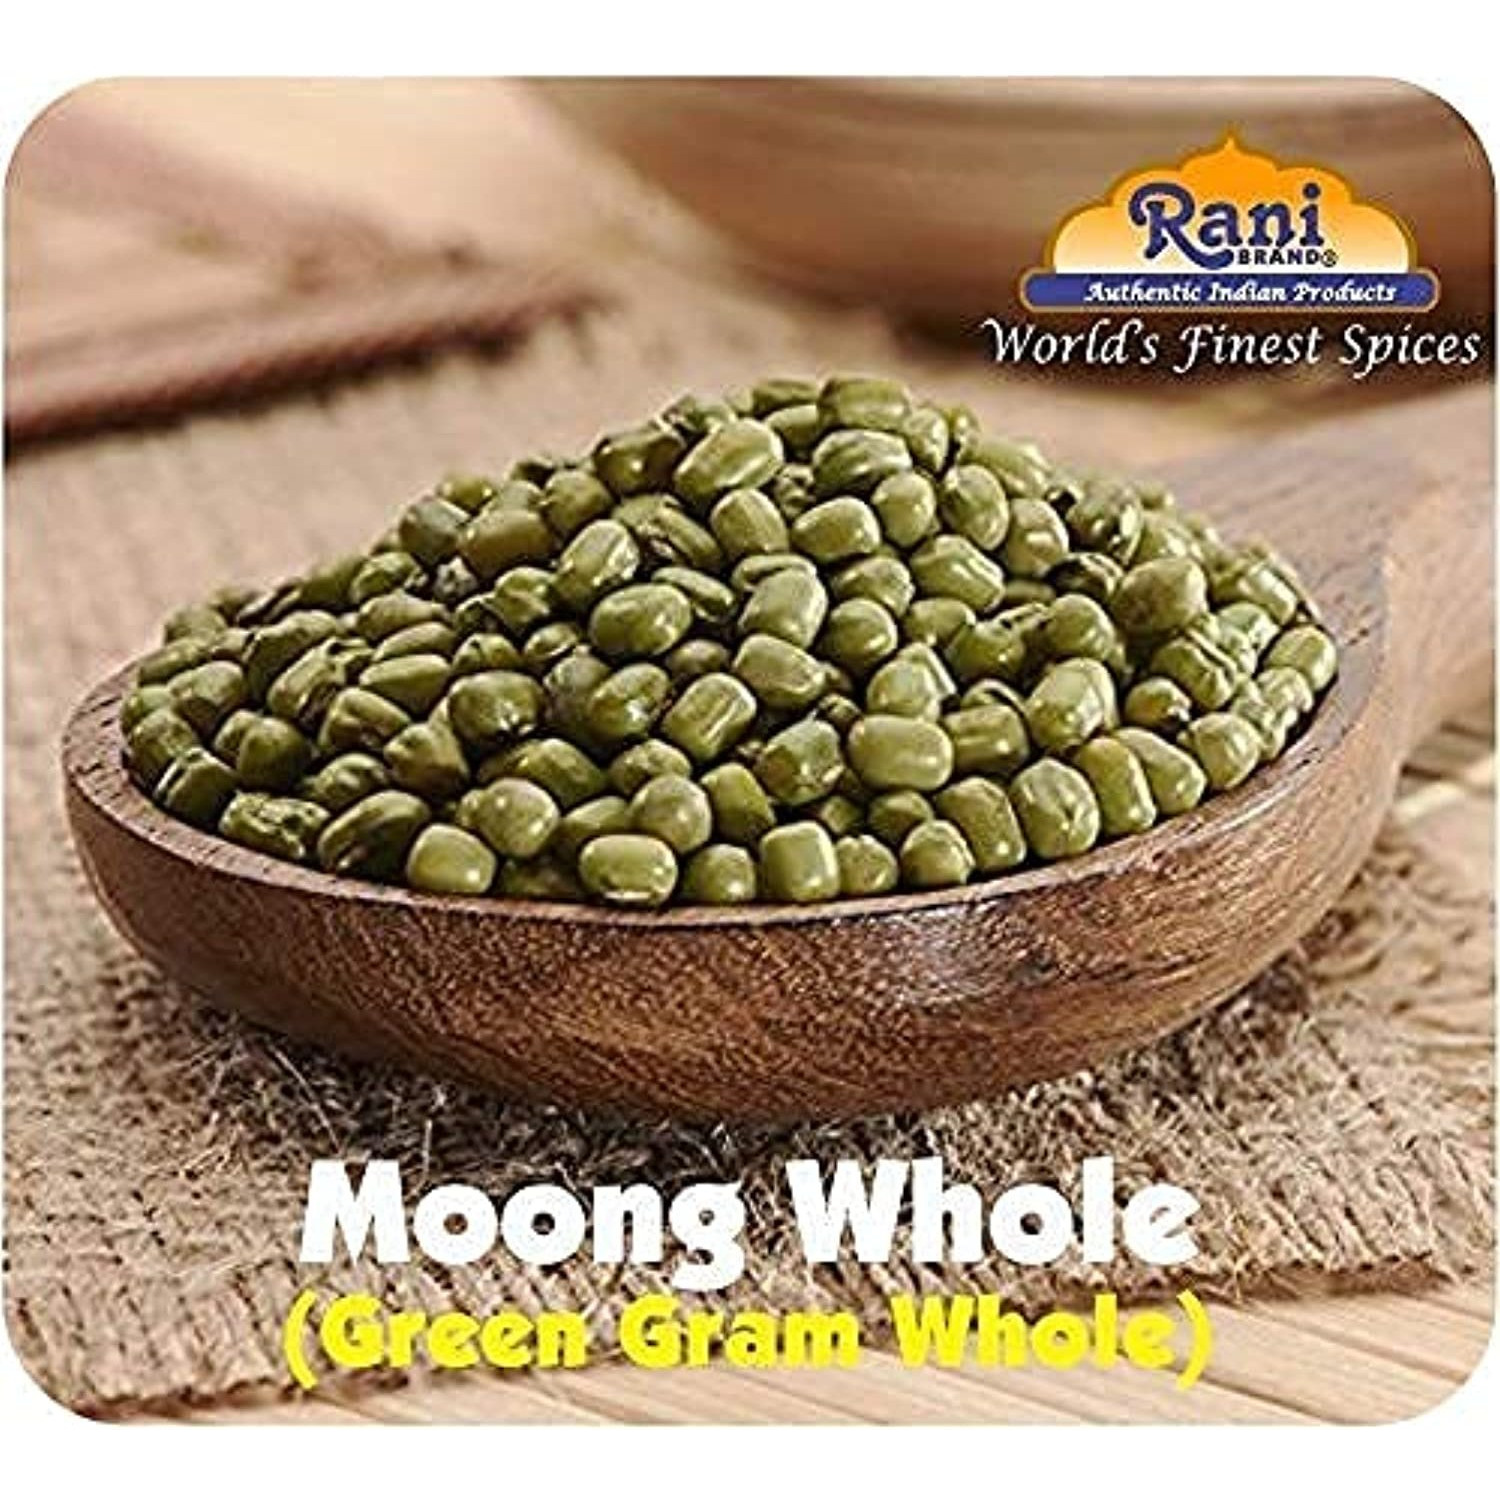 Rani Moong Whole (Ideal for cooking & sprouting, Whole Mung Beans with skin) Lentils Indian 8lb (128oz) Pack of 5 (Total 40lbs) Bulk ~ All Natural | NON-GMO | Vegan | Indian Origin